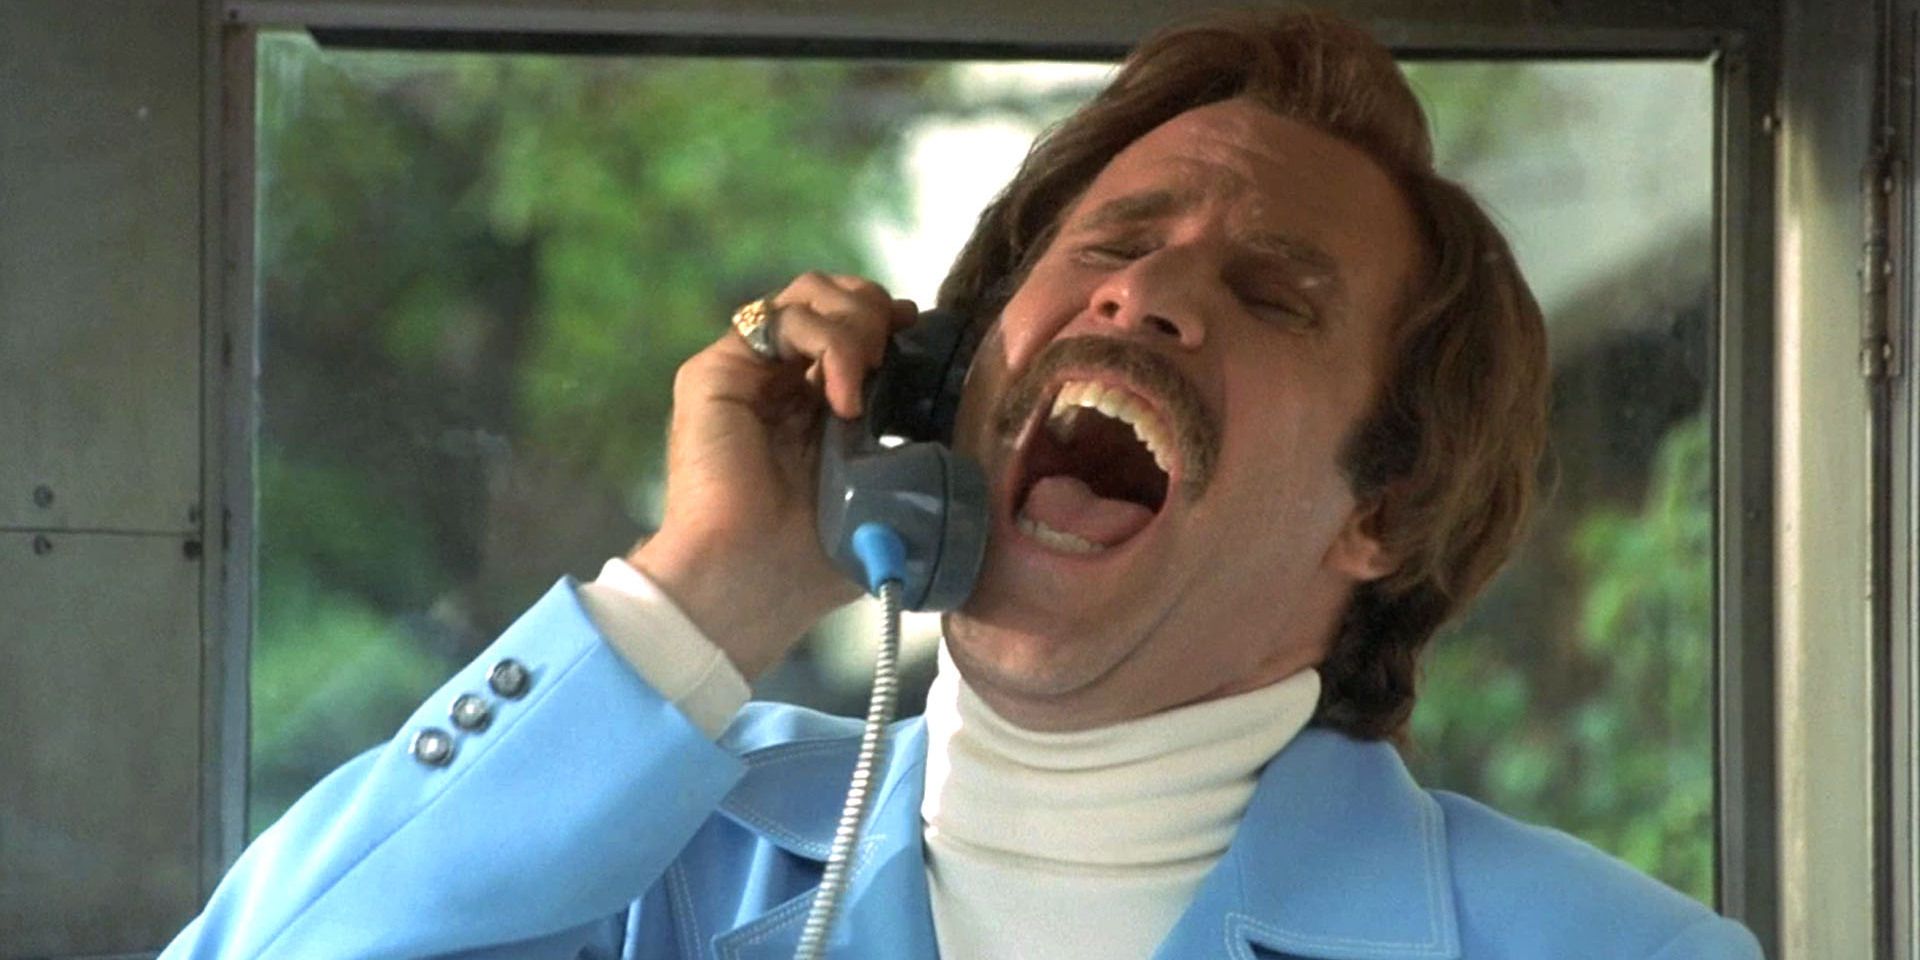 A still from the film Anchorman featuring Will Ferrell as Ron Burgundy yelling into the telephone of a payphone